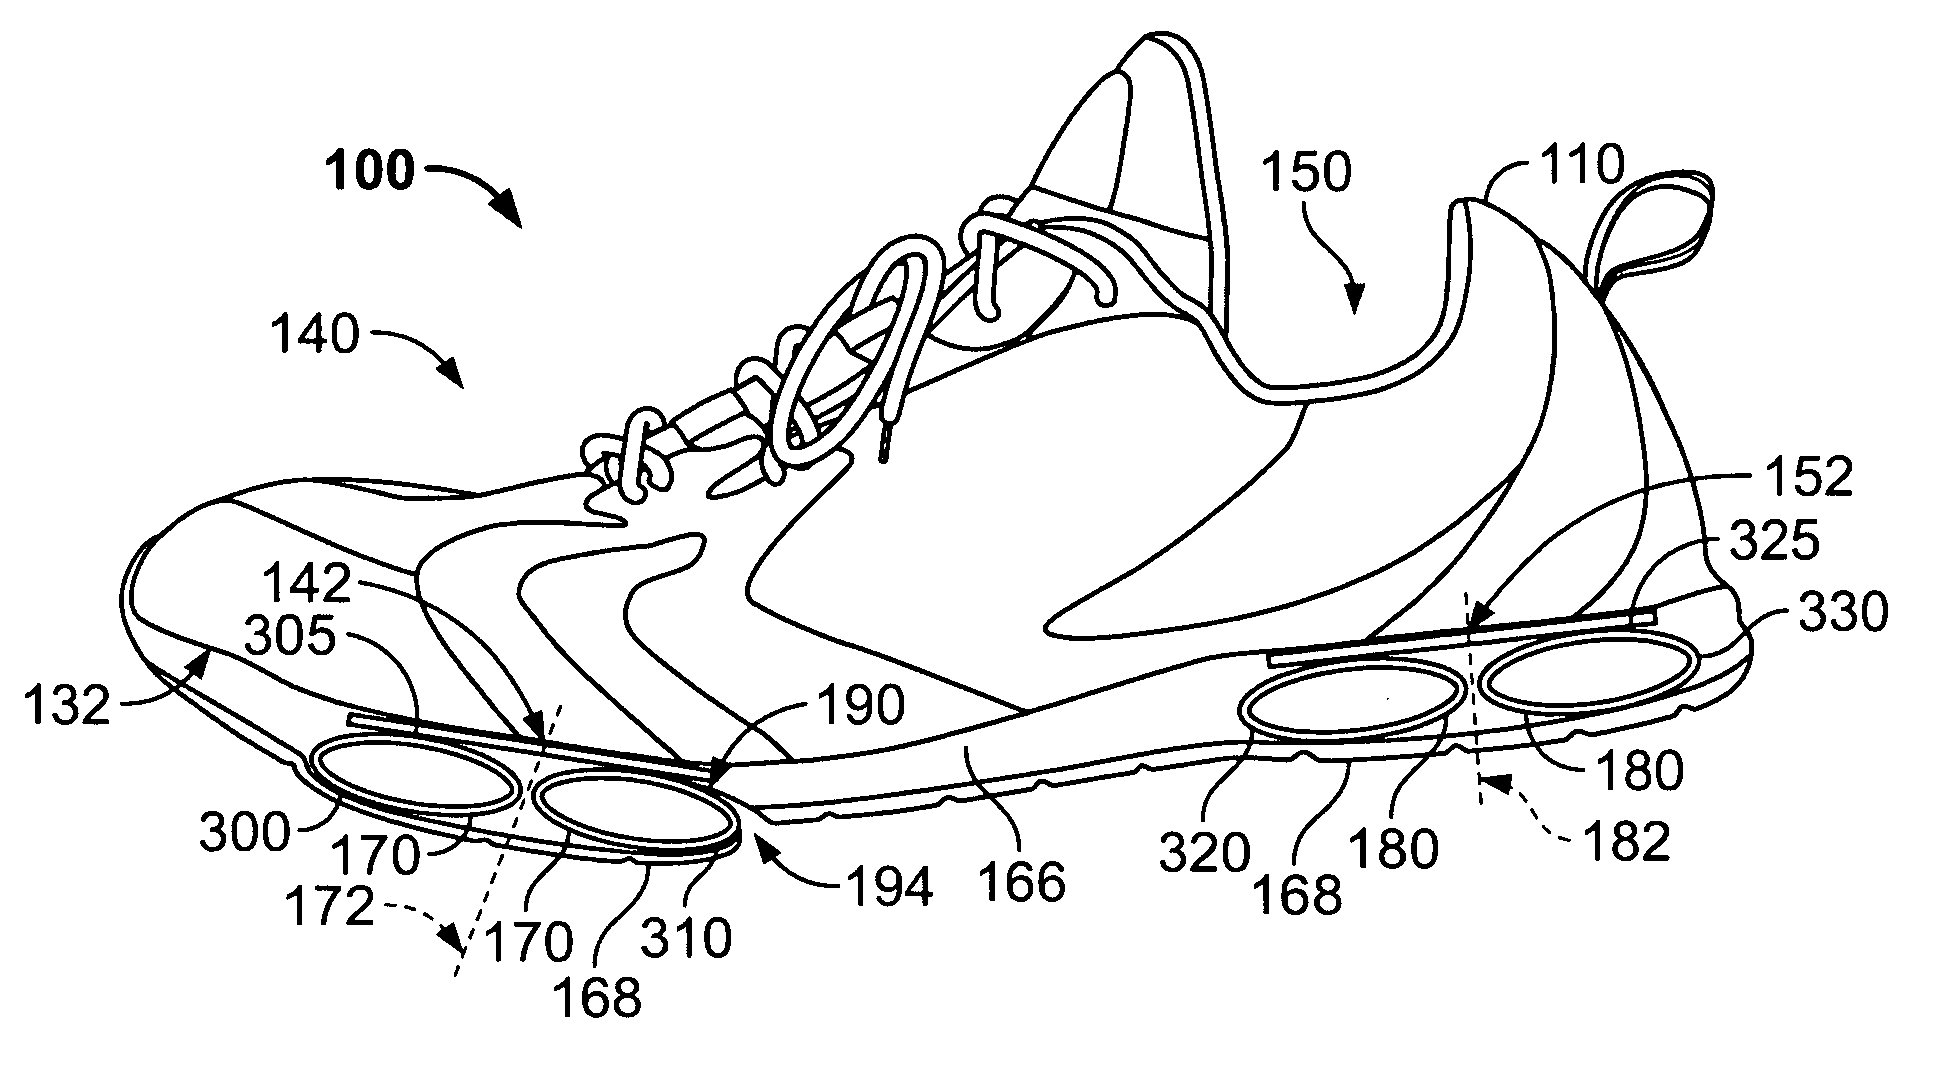 Shoe apparatus with improved efficiency